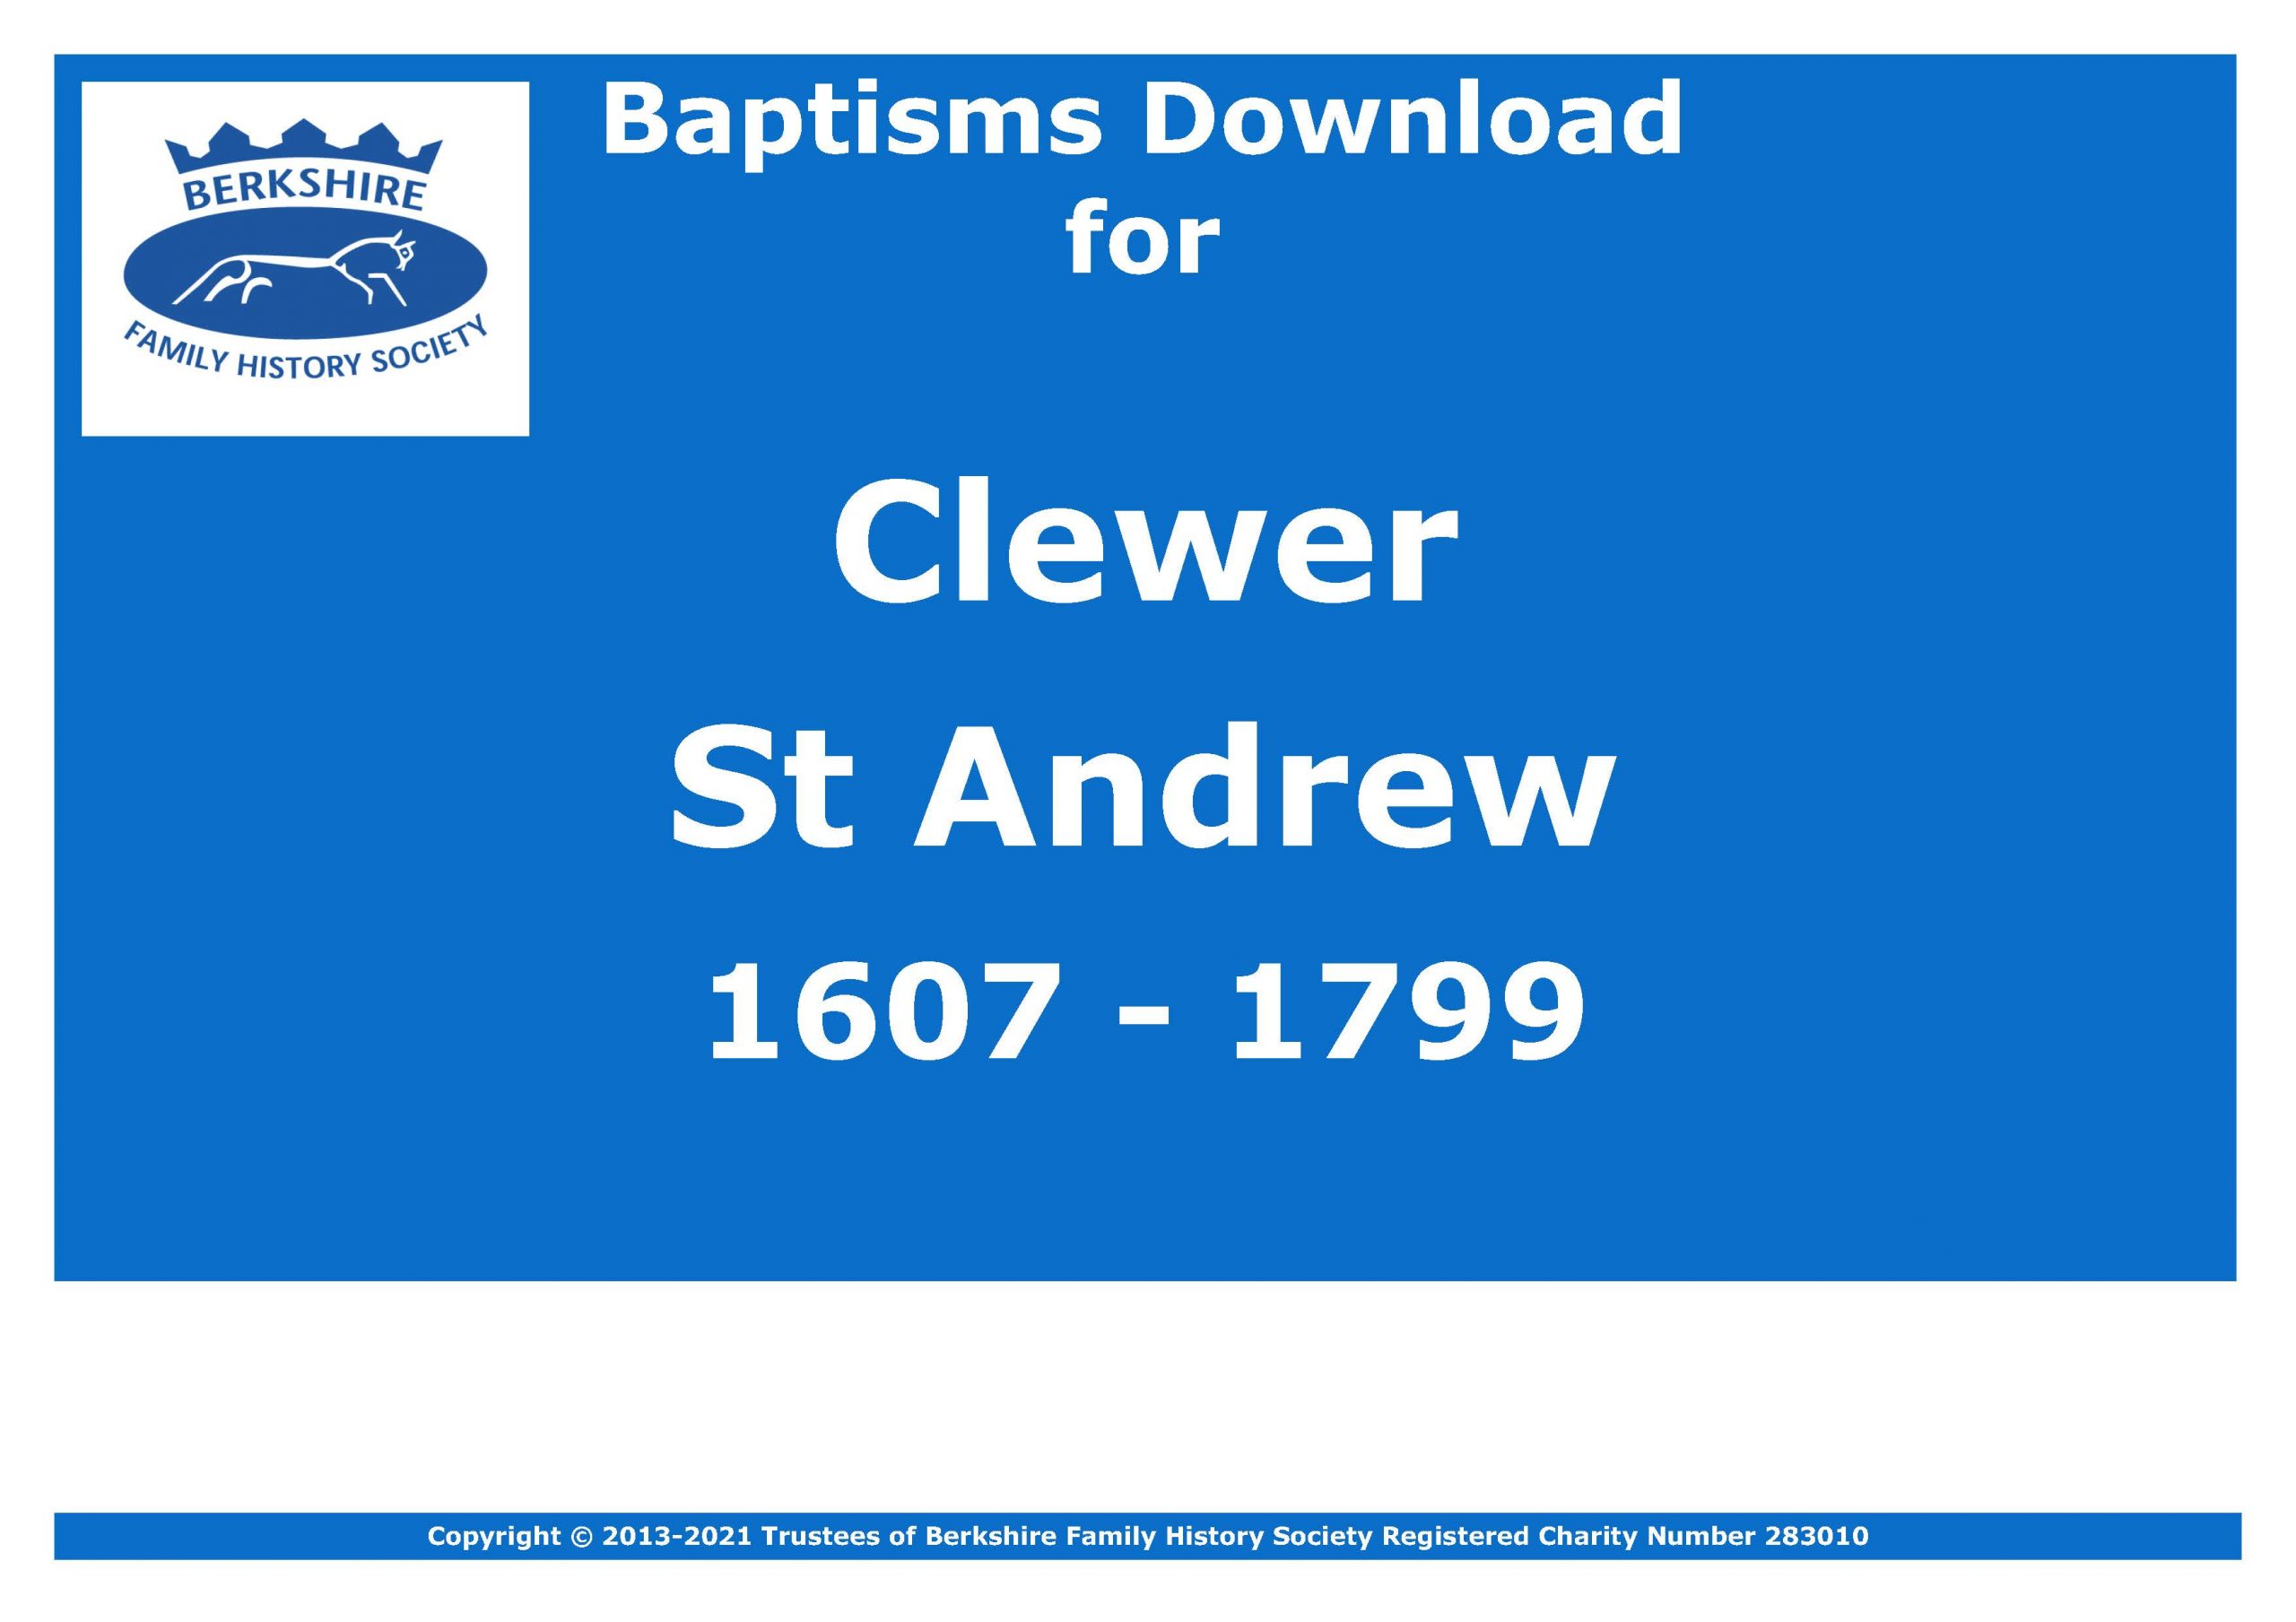 Clewer St Andrew Baptisms 1607-1799 (Download) D1617 (Part 1 of 2)